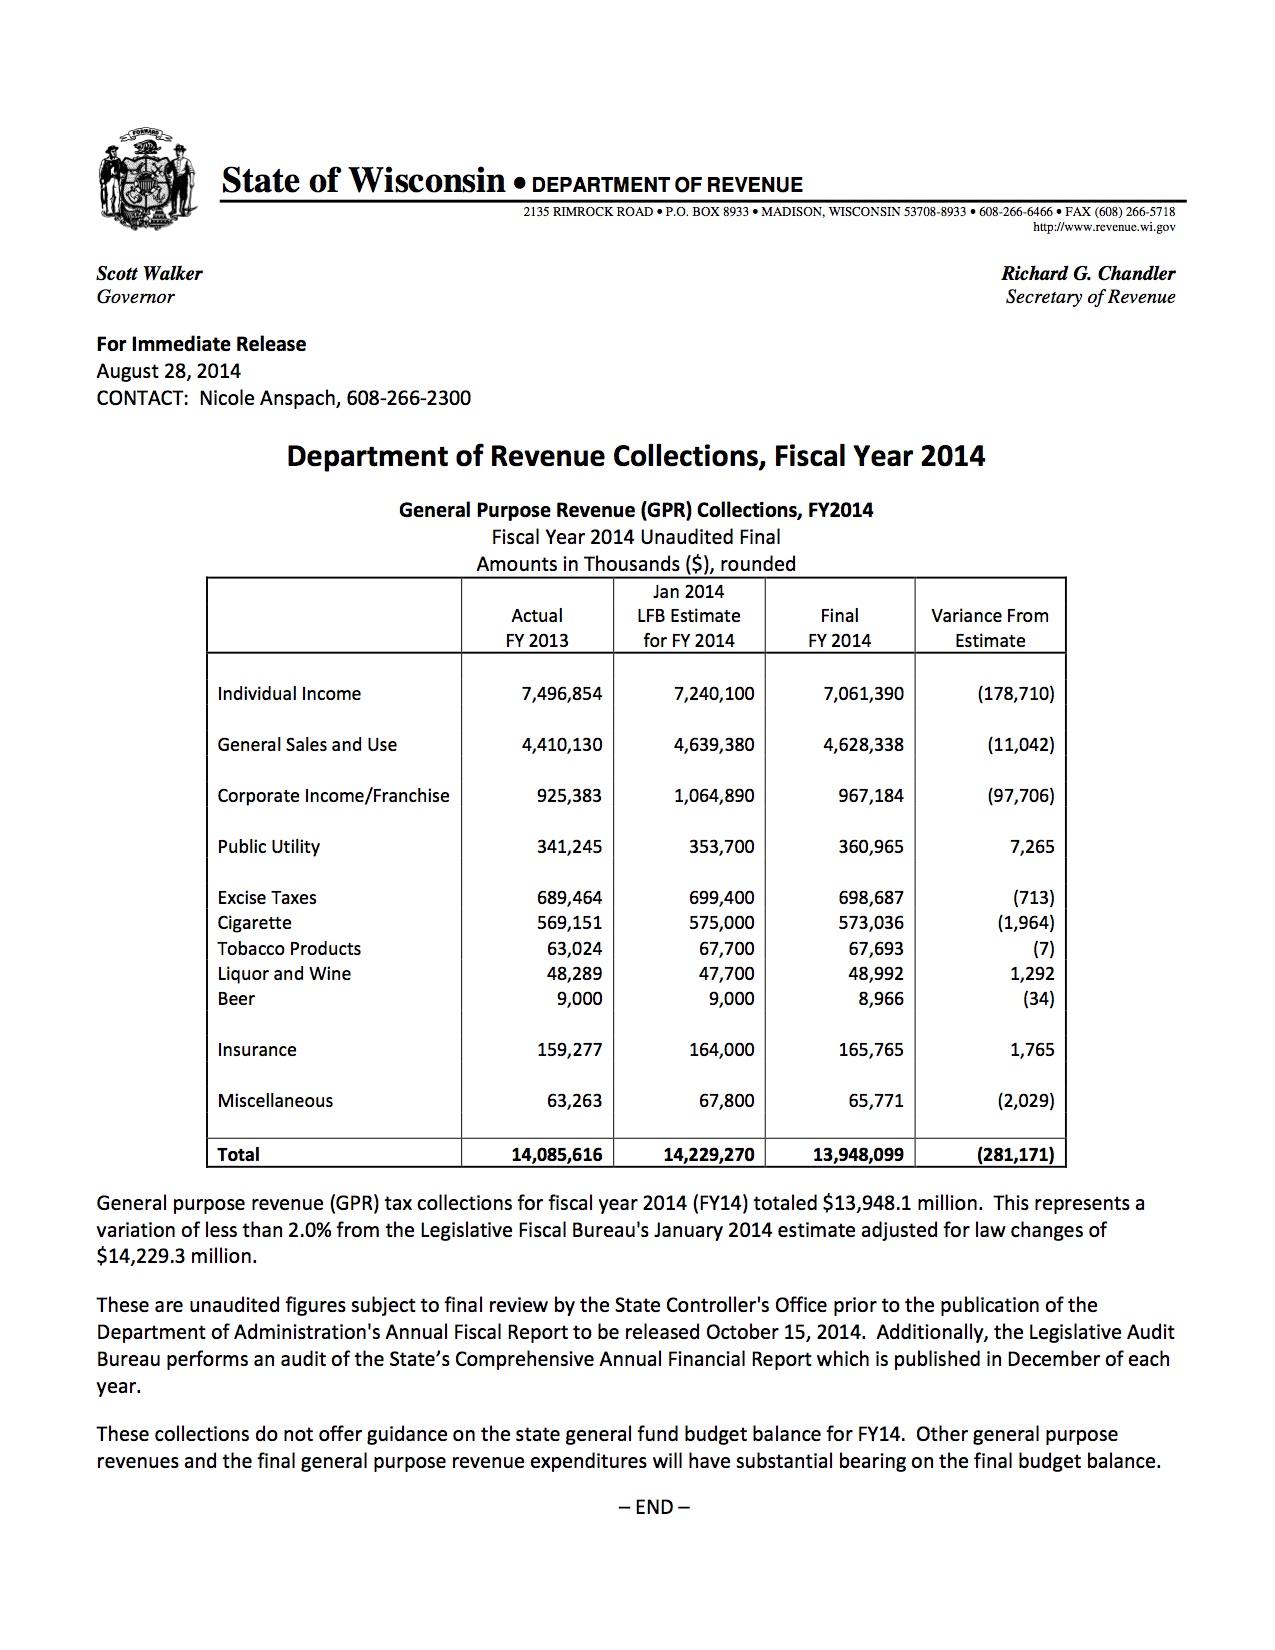 fy 2014 state revenue collections